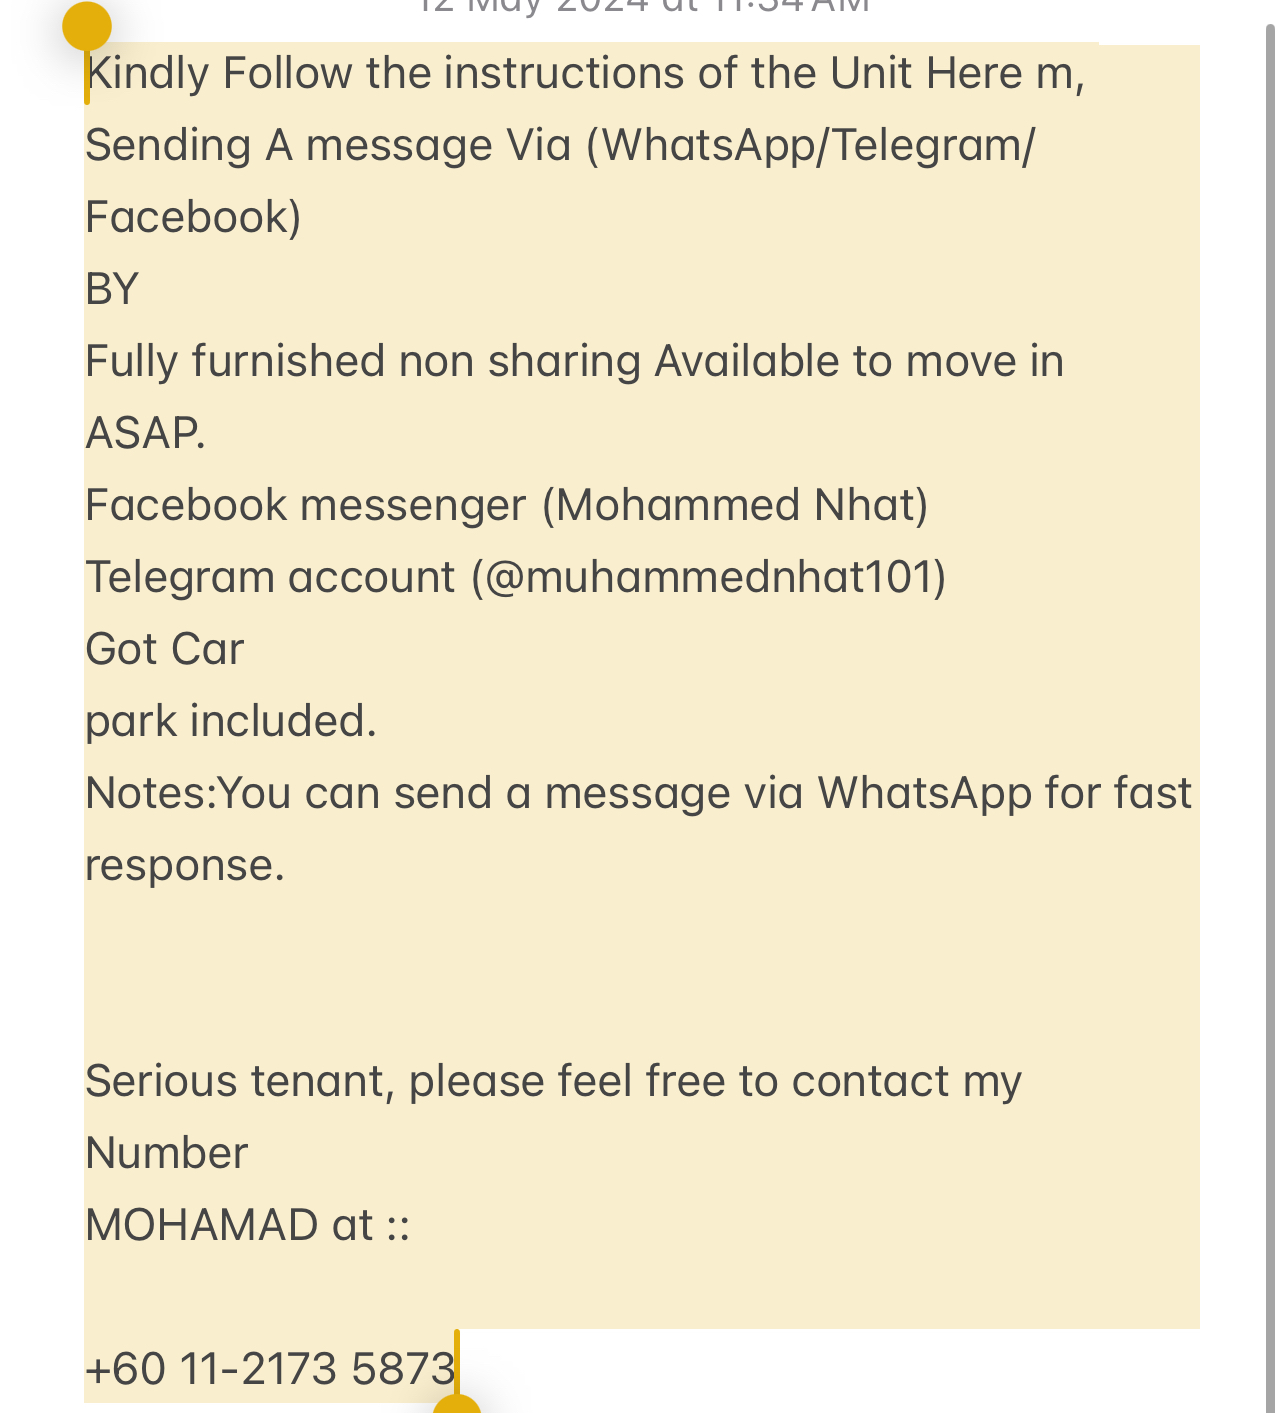 room for rent, studio, sepang international circuit, Send the owner a message on WhatsApp/facebook if you want to RENT the unit facebook (Mohammed Nhat)&Telegram(@muhammednhat101) Fully furnished non sharing :(comfortable)